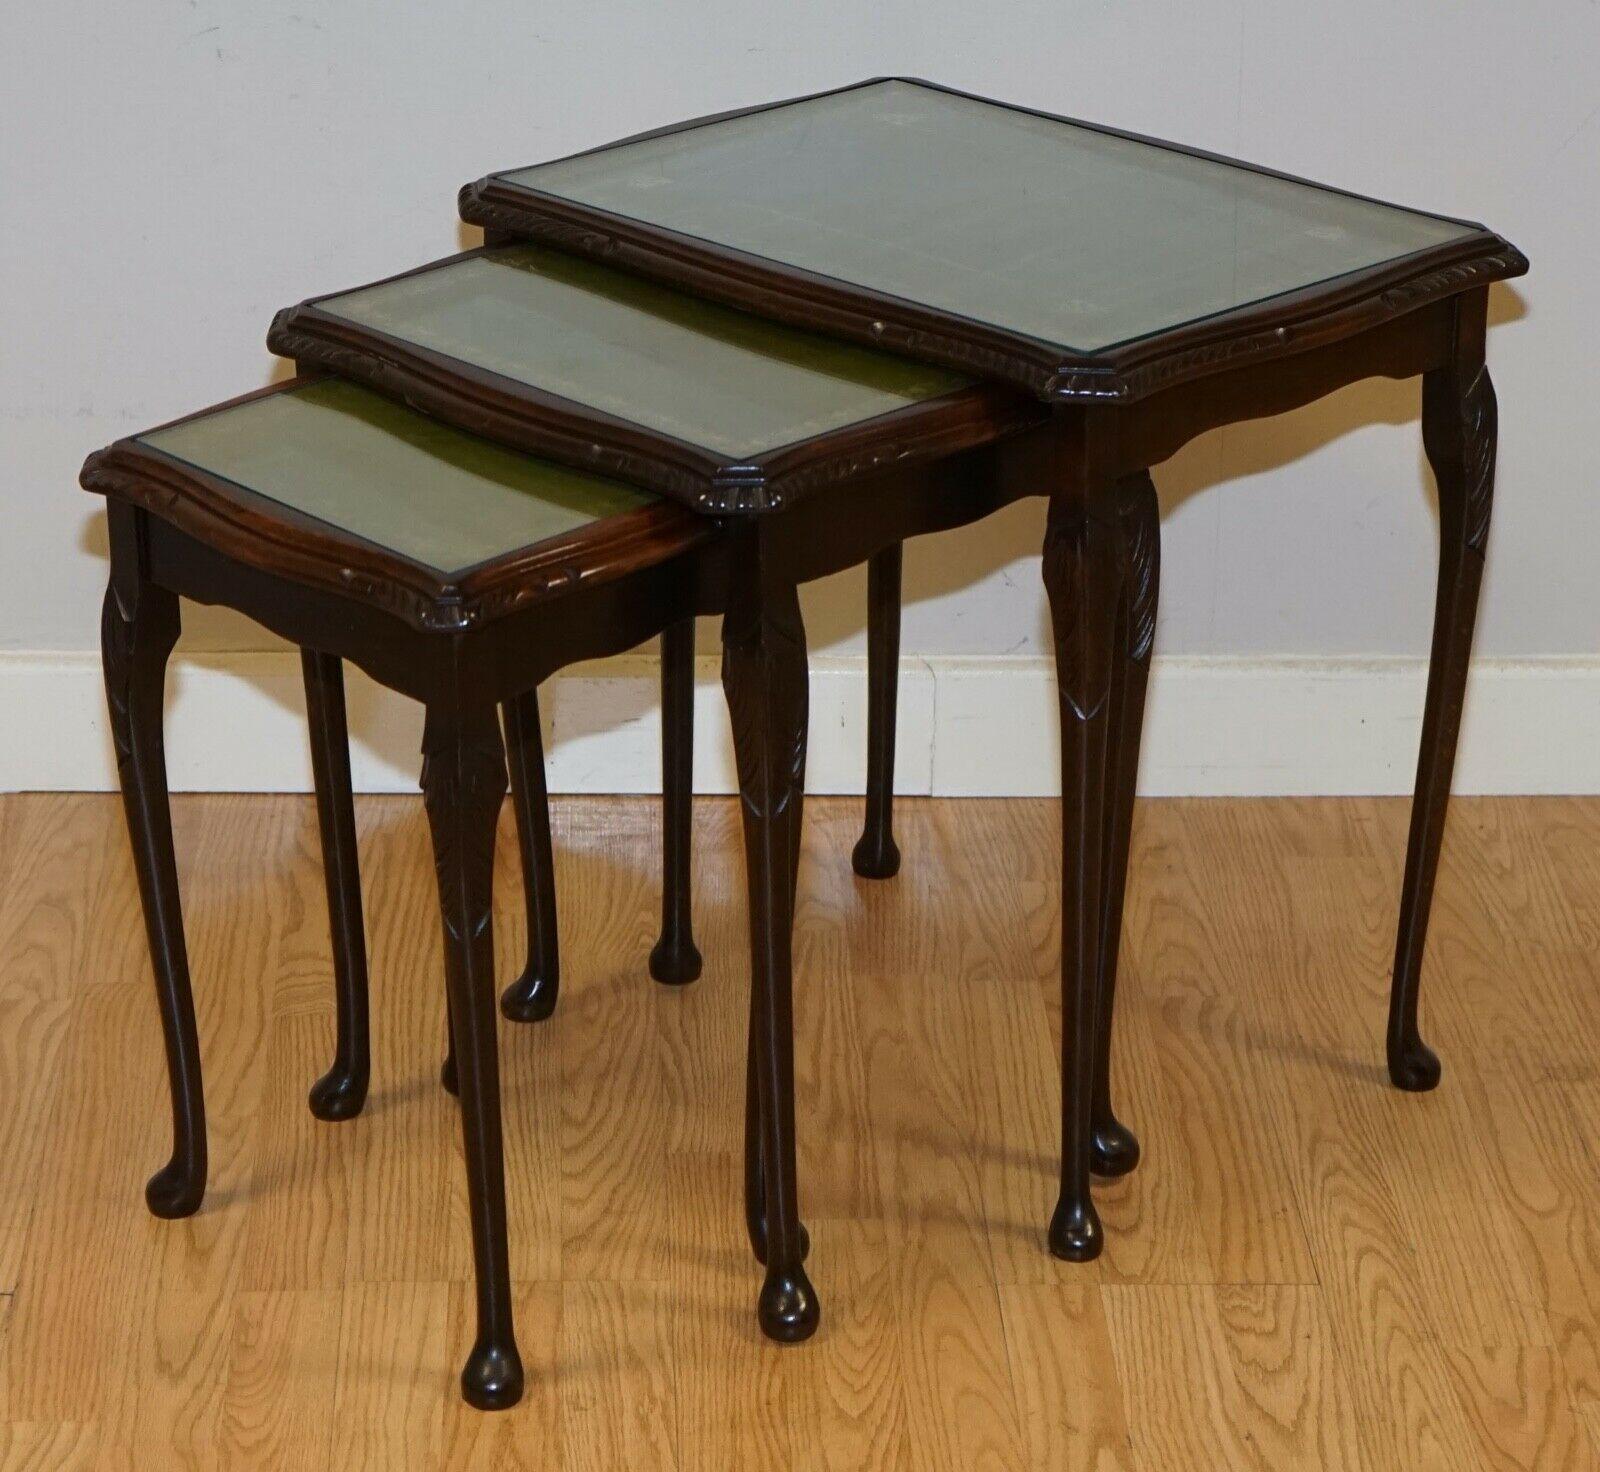 We are delighted to offer this vintage nest of tables with green leather top, they include glass tops which is very helpful to keep the leather undamaged. 

They have some marks here and there but nothing significant, and this just adds character